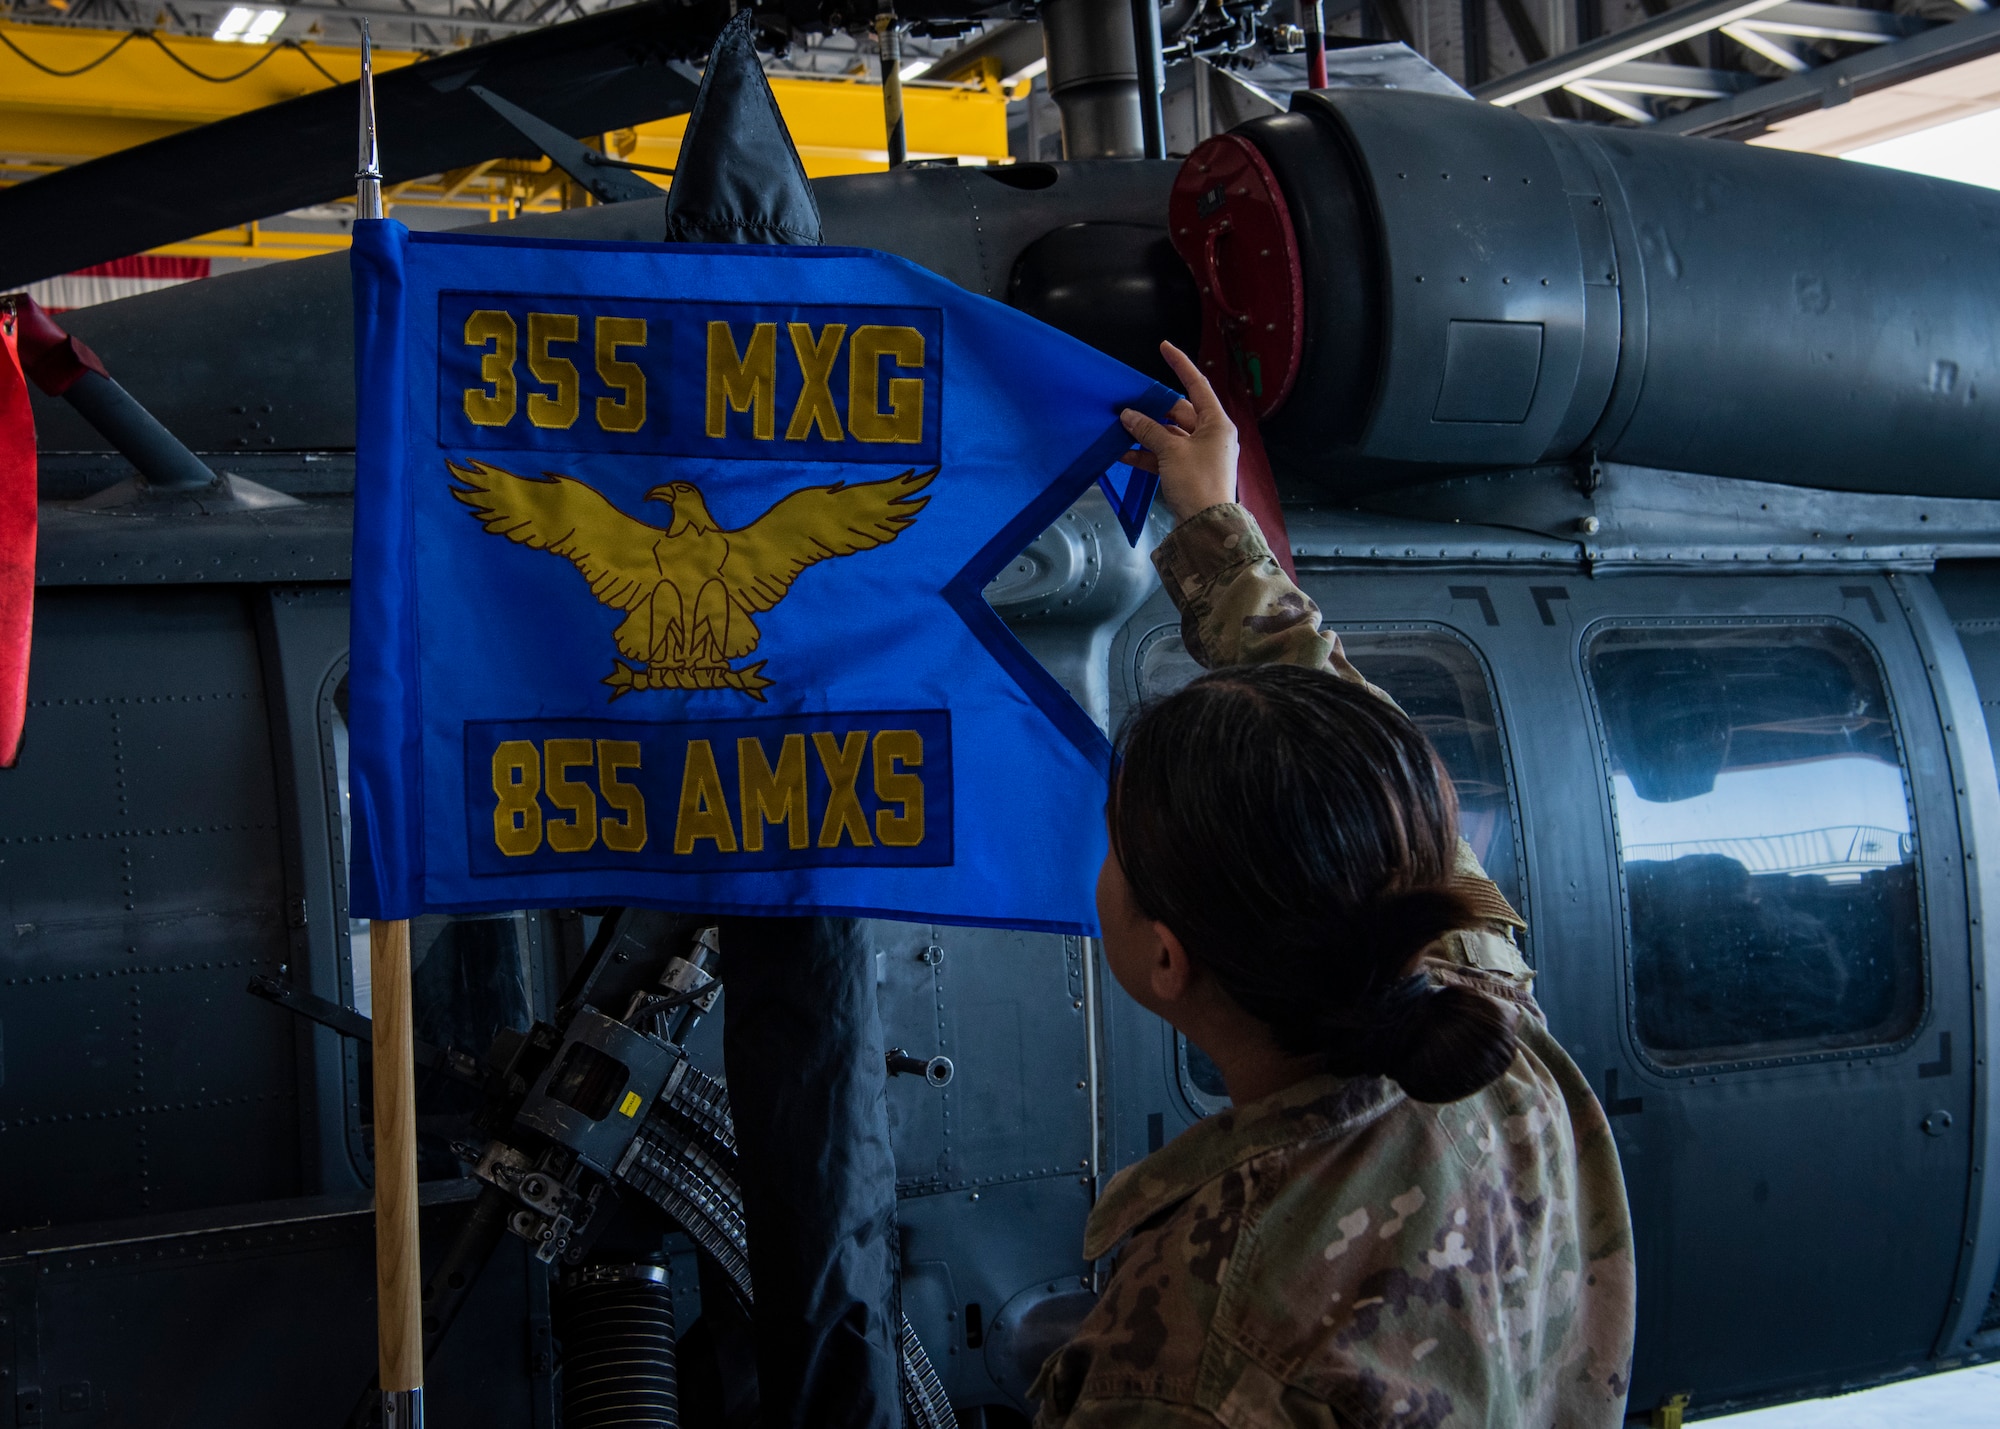 An Airman straightens a guidon flag in front of a helicopter.